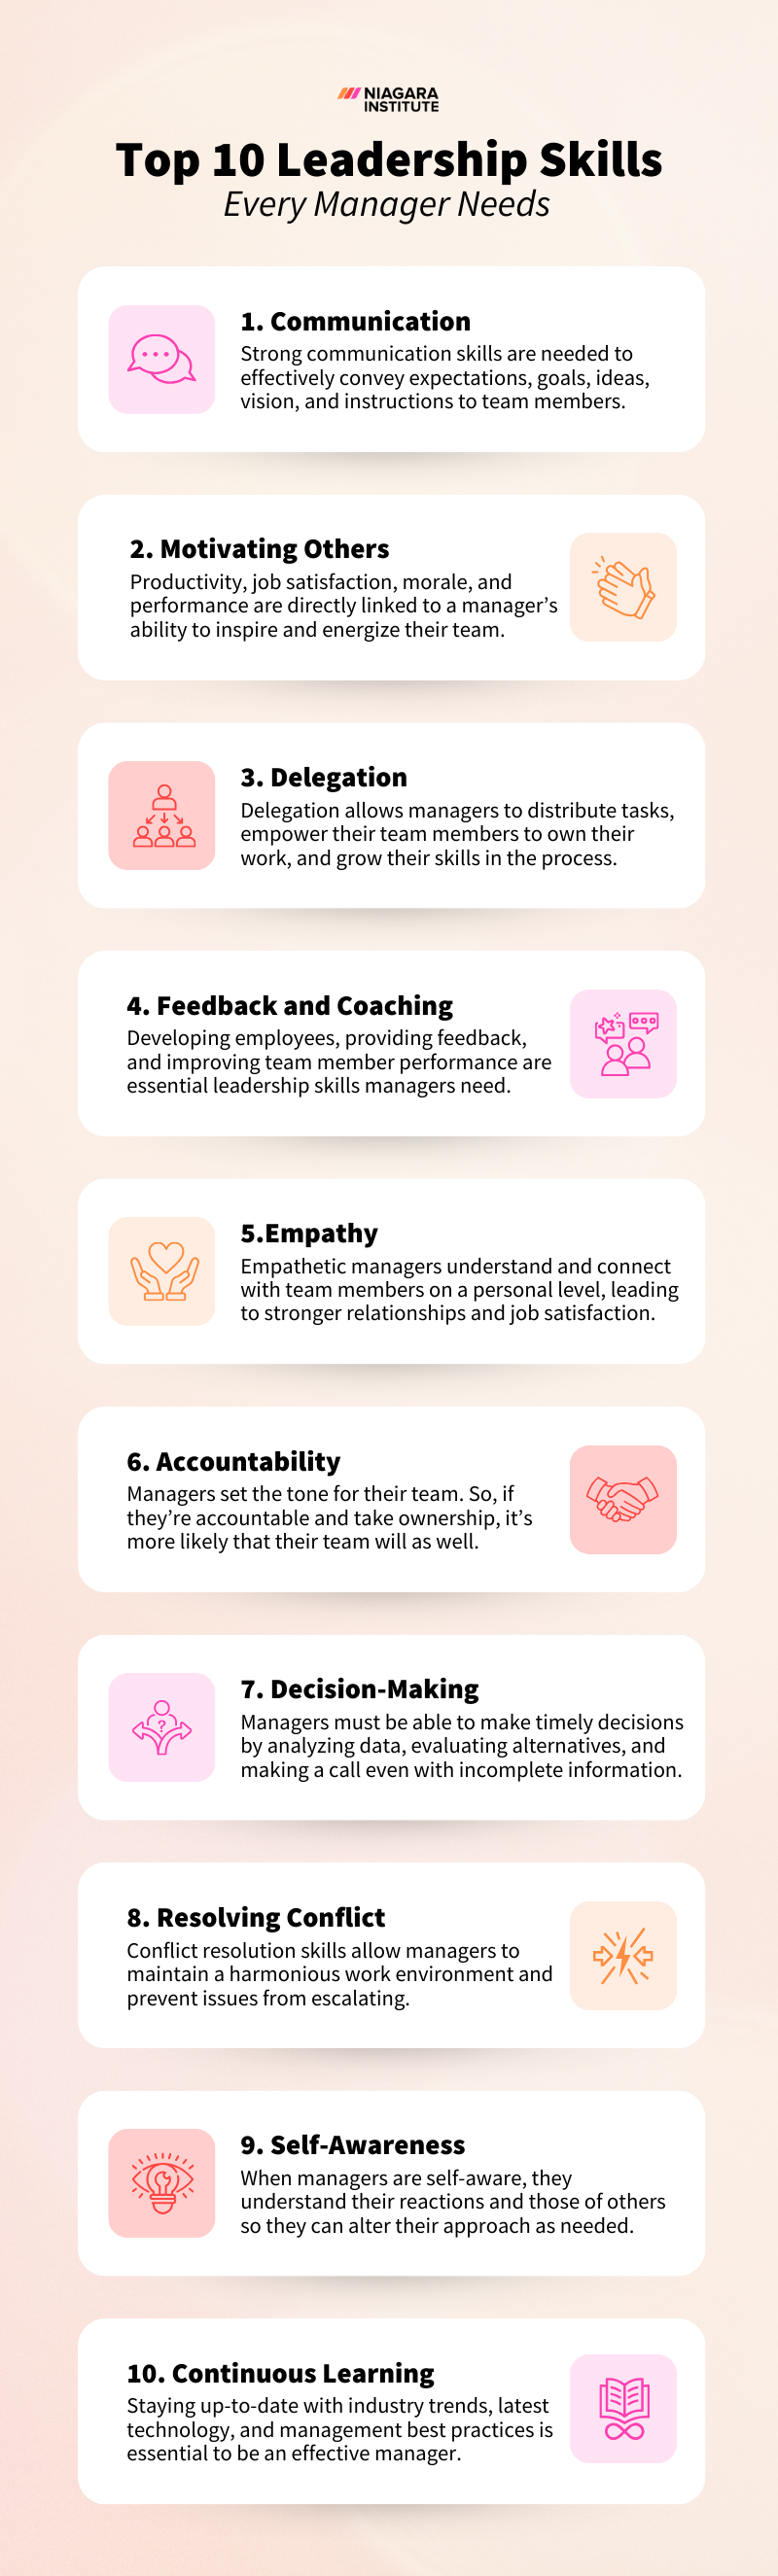 Top 10 Leadership Skills for Managers